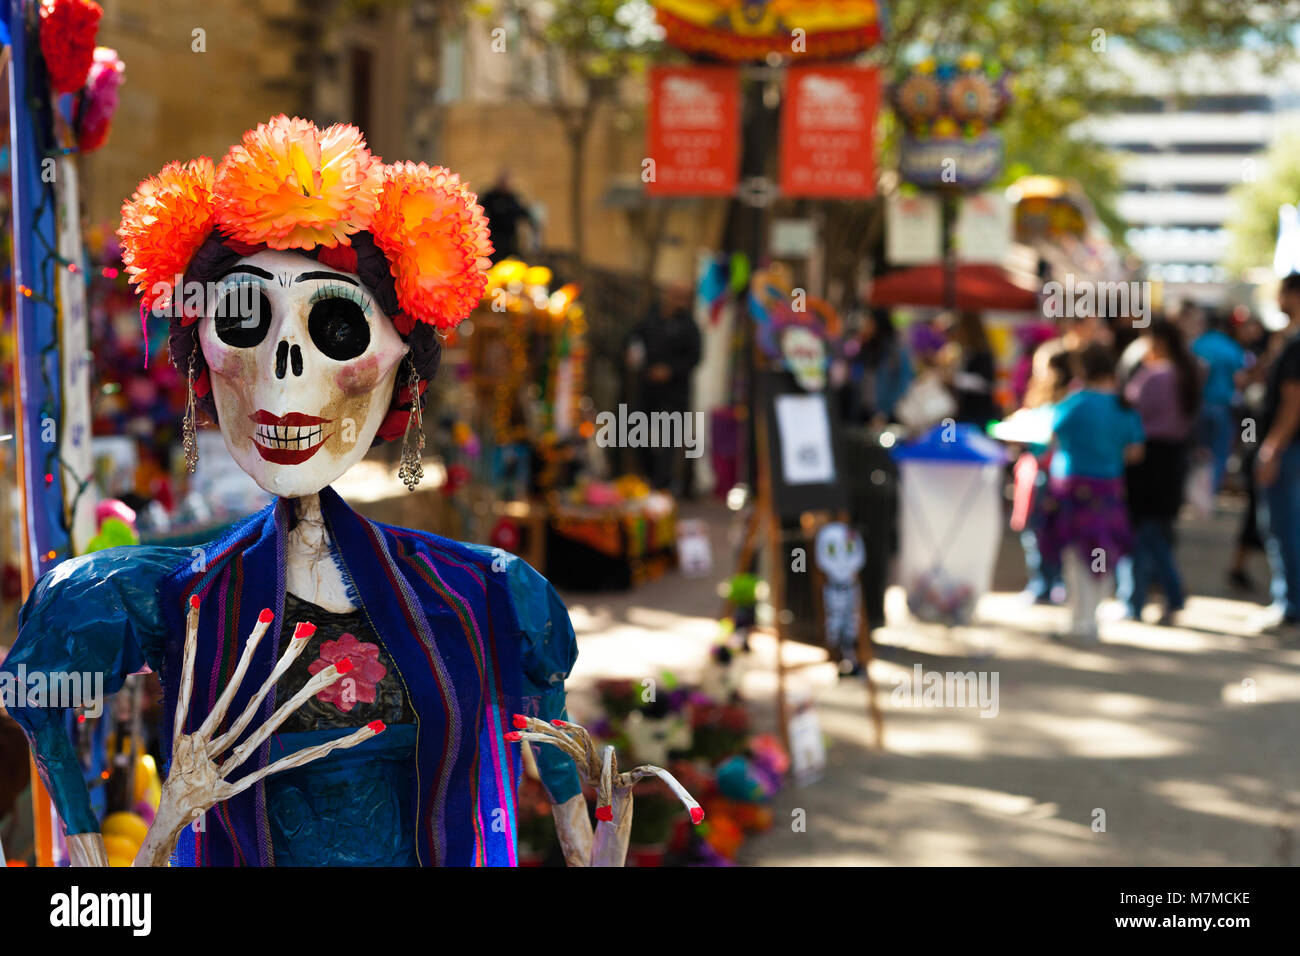 Skeleton mannequin painted and decorated with orange paper mache flowers and earrings for Dia de los Muertos/ Day of the Dead Stock Photo